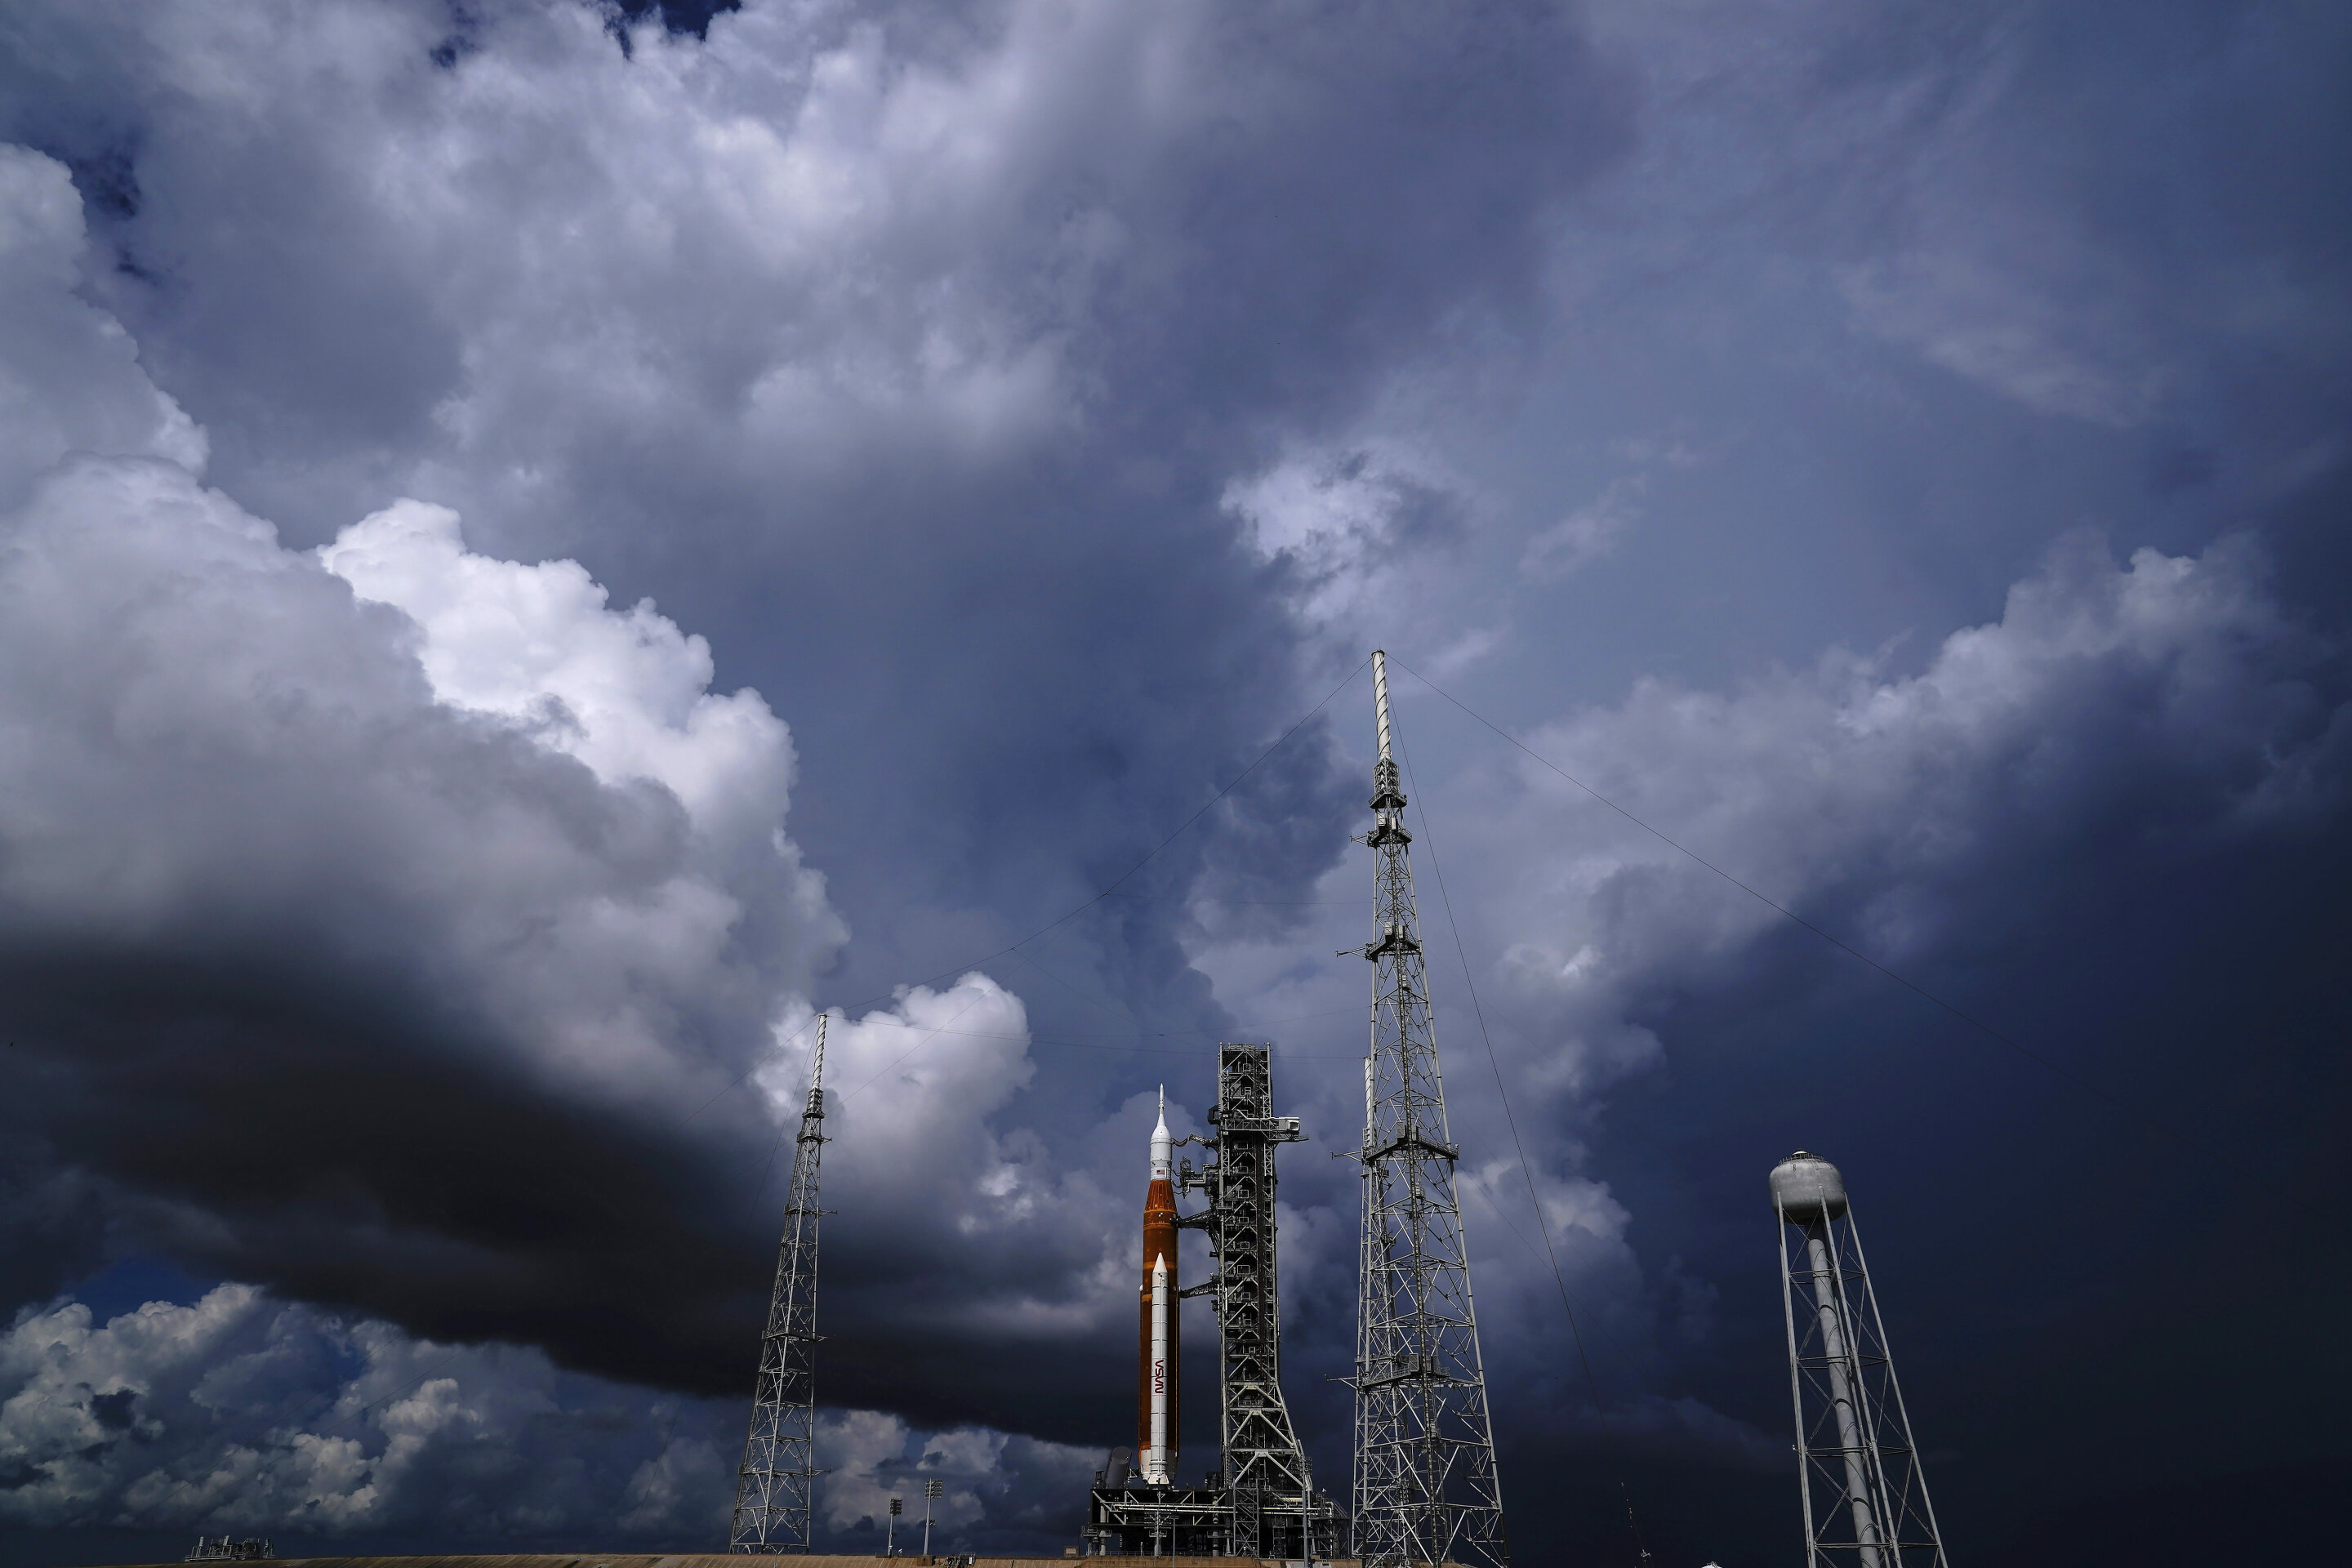 Approaching storm could delay start test for NASA moon rocket